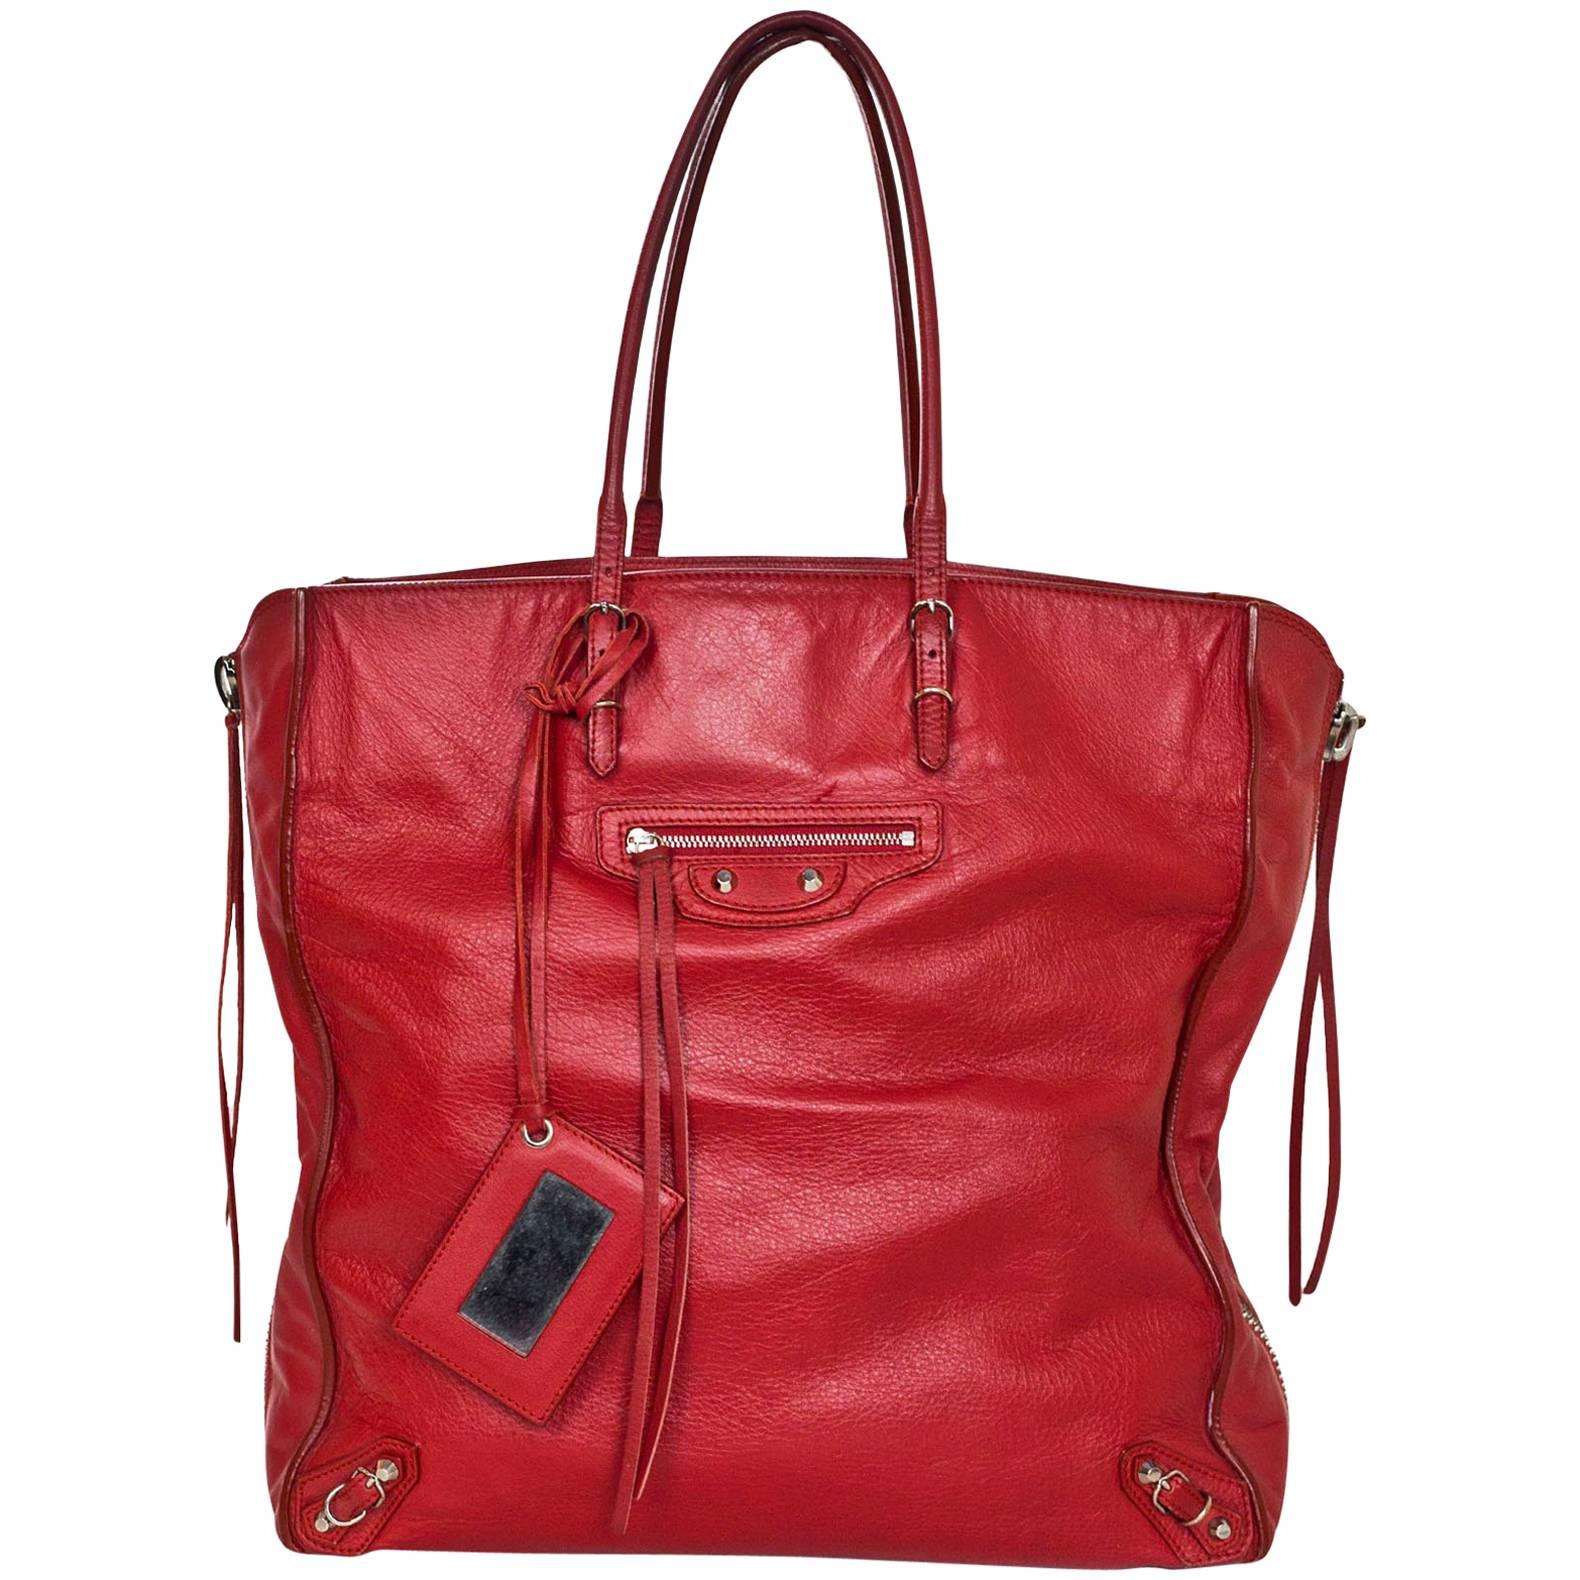 Balenciaga Red Leather A4 Papier Zip Tote Bag with Dust Bag